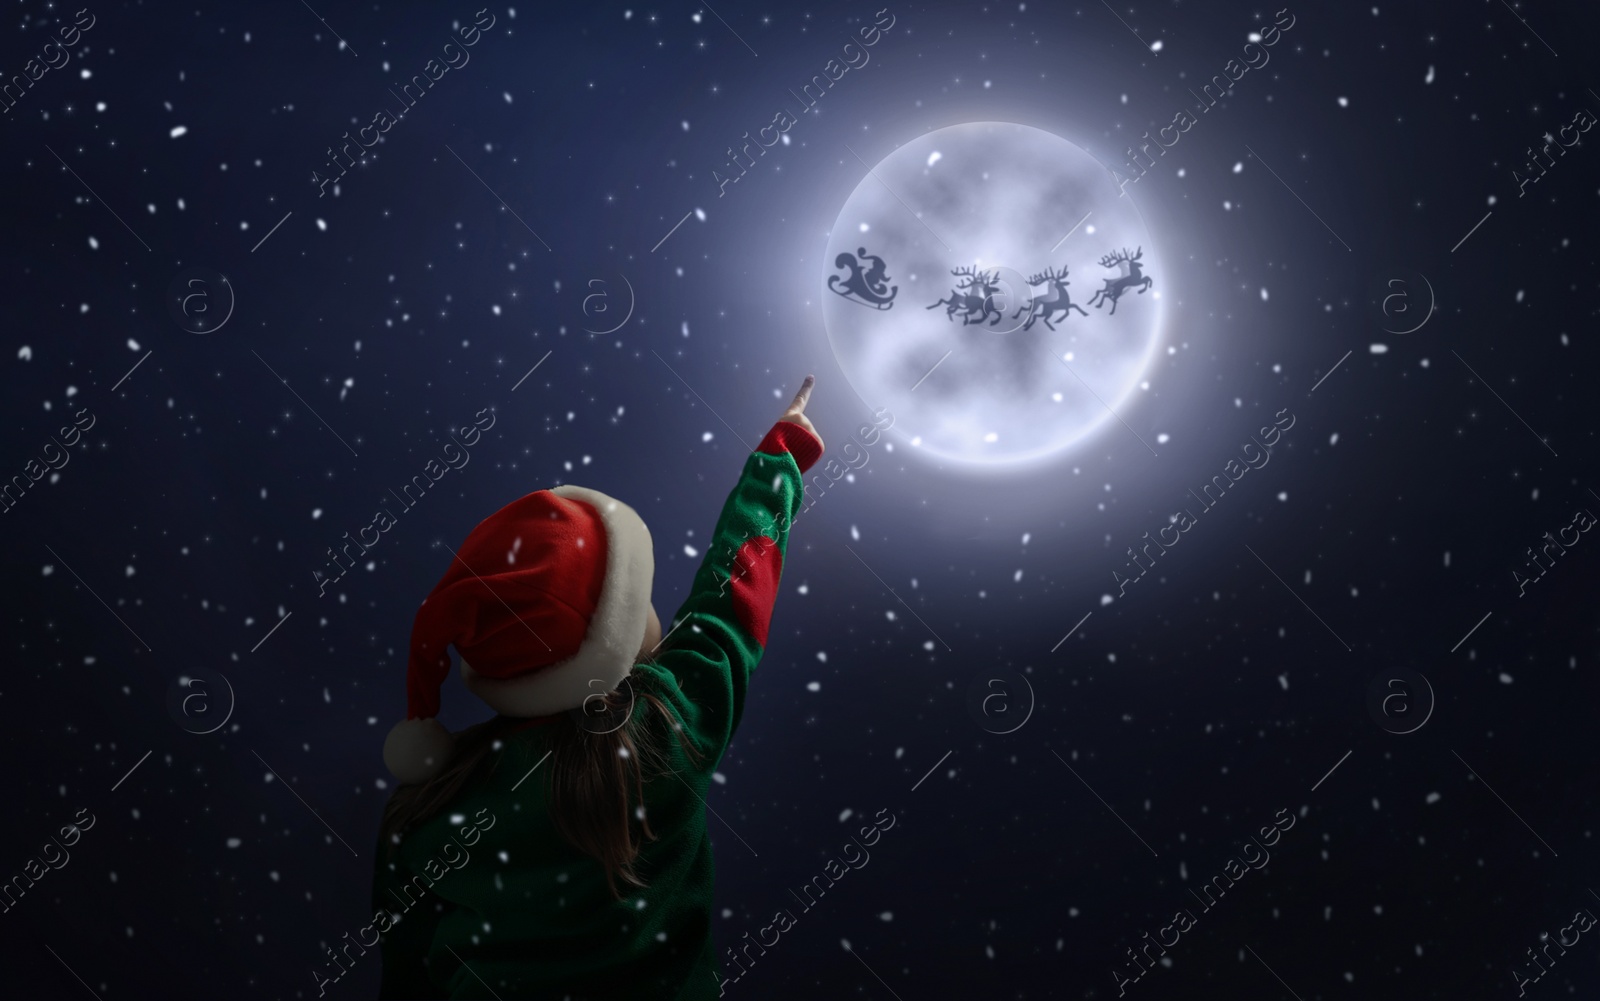 Image of Cute little girl looking at Santa Claus with reindeers in sky on full moon night. Christmas holiday